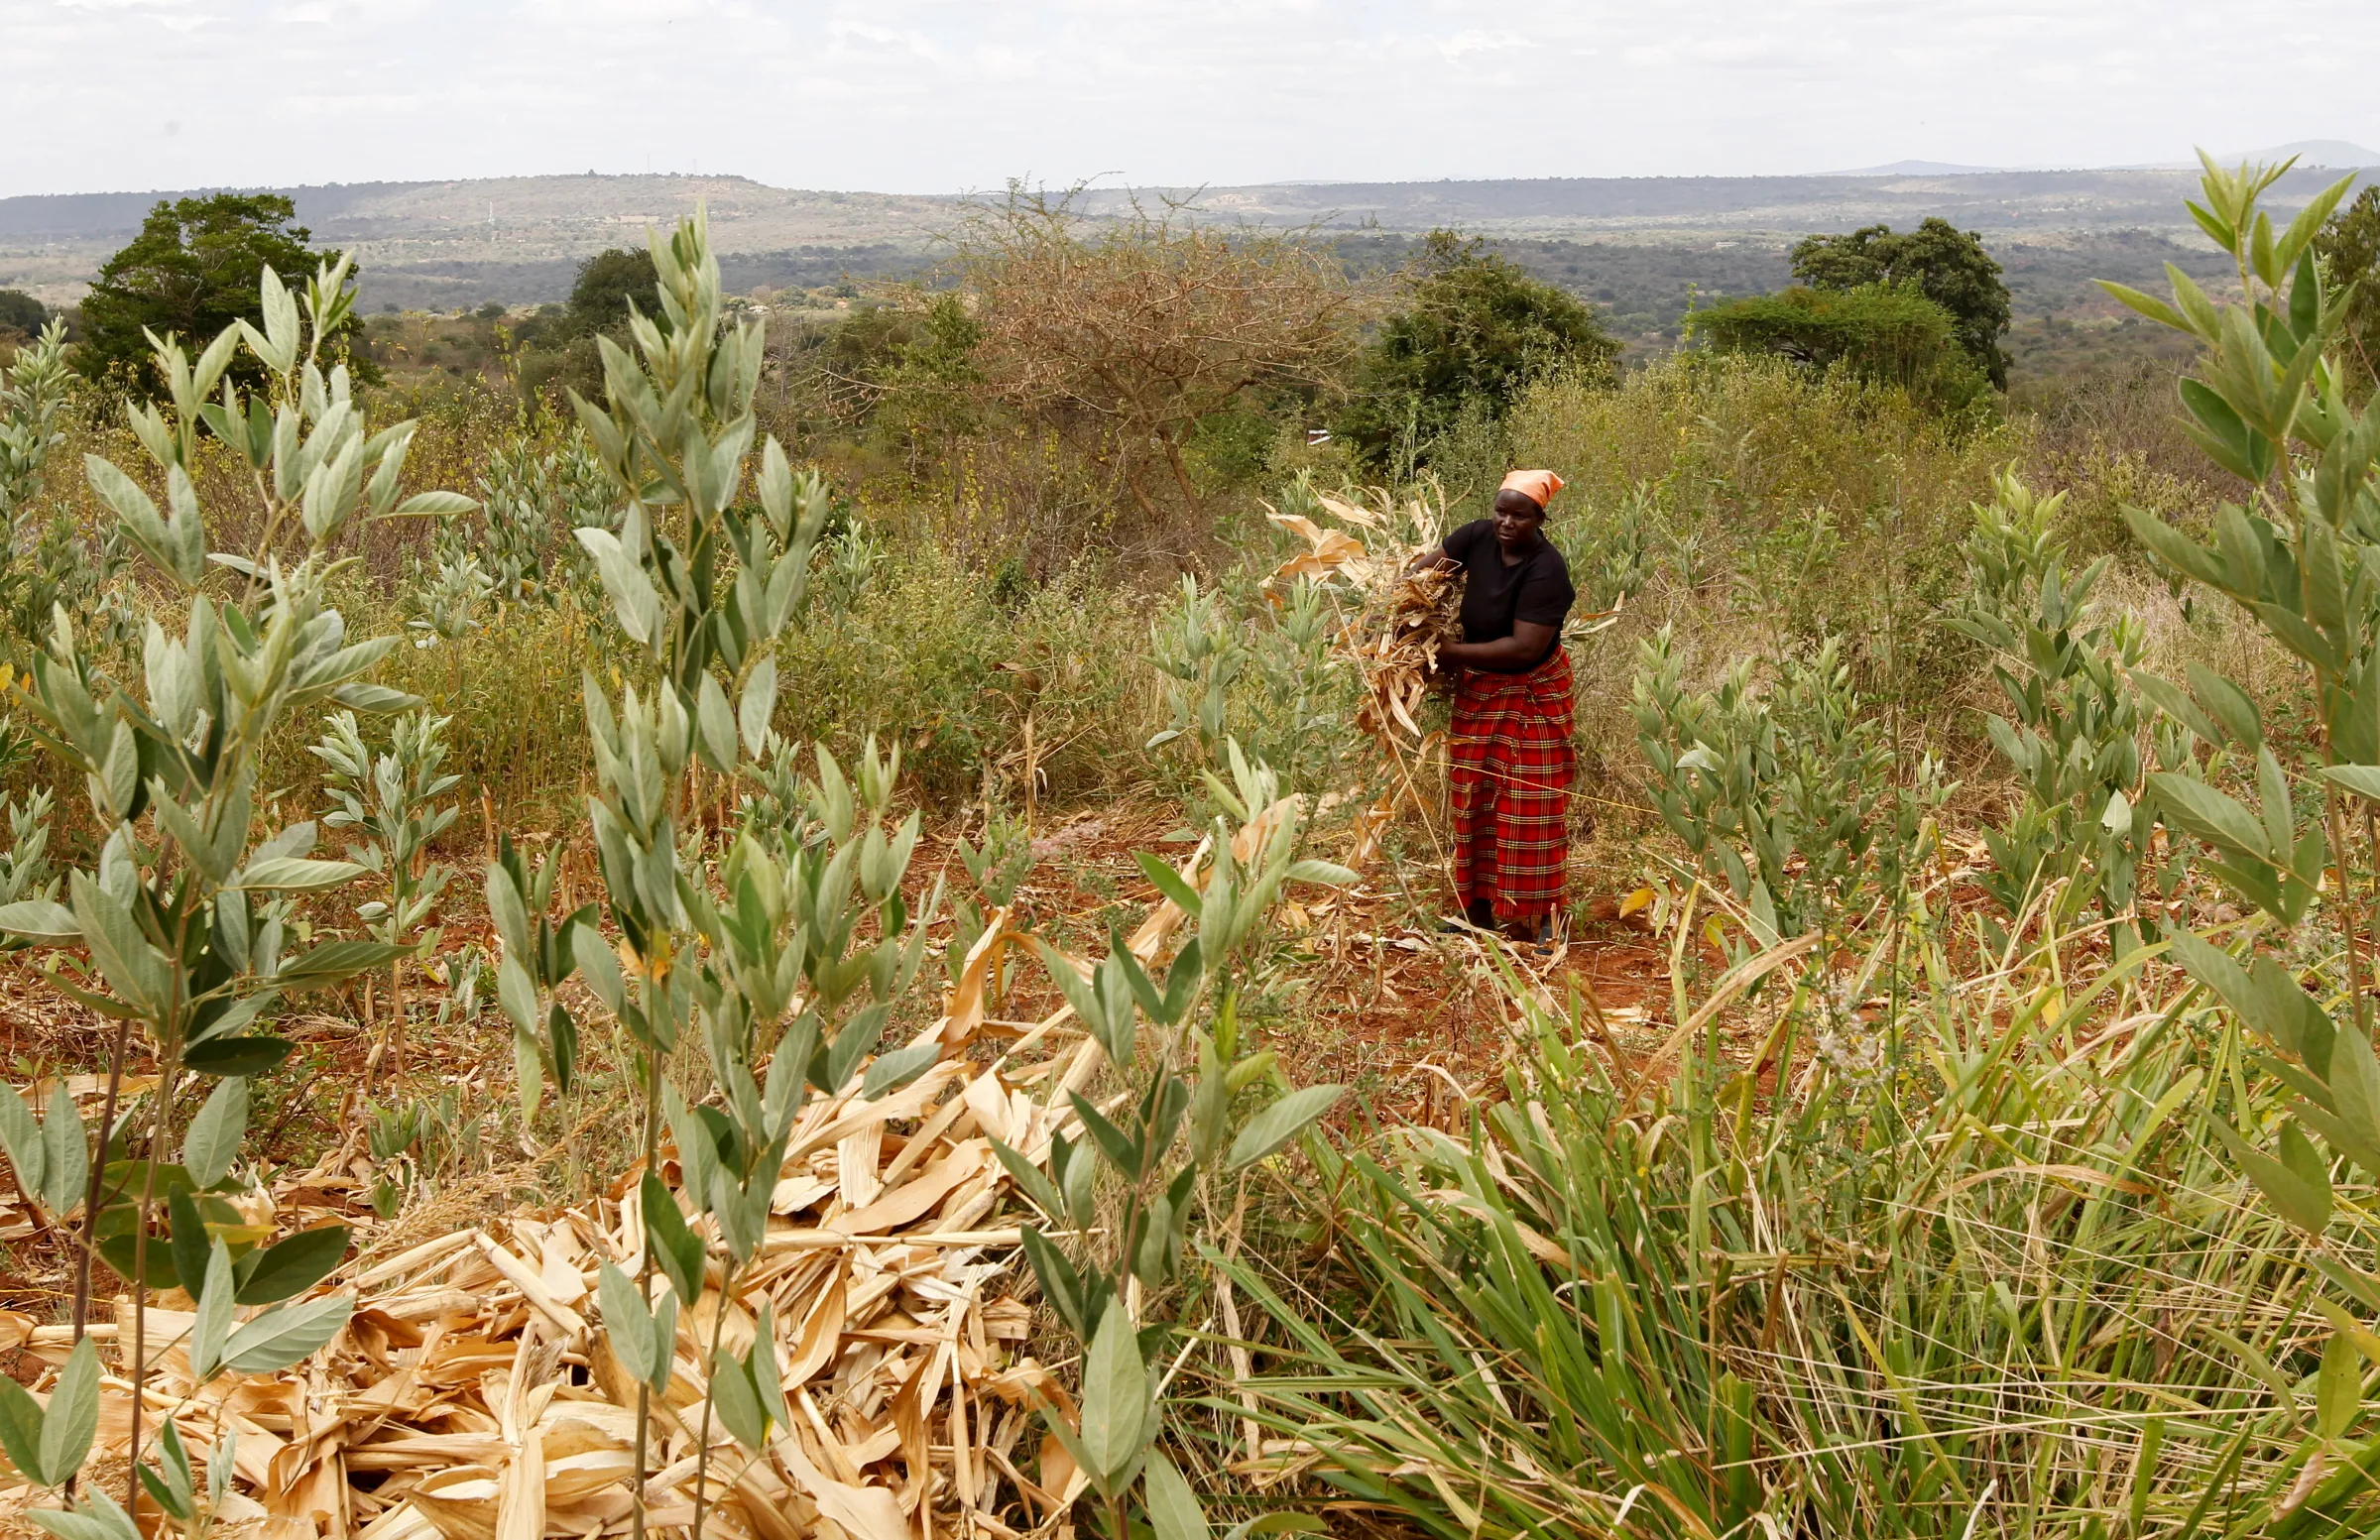 A woman works on her farm after harvesting her maize, in Kitui county, Kenya, March 17, 2021